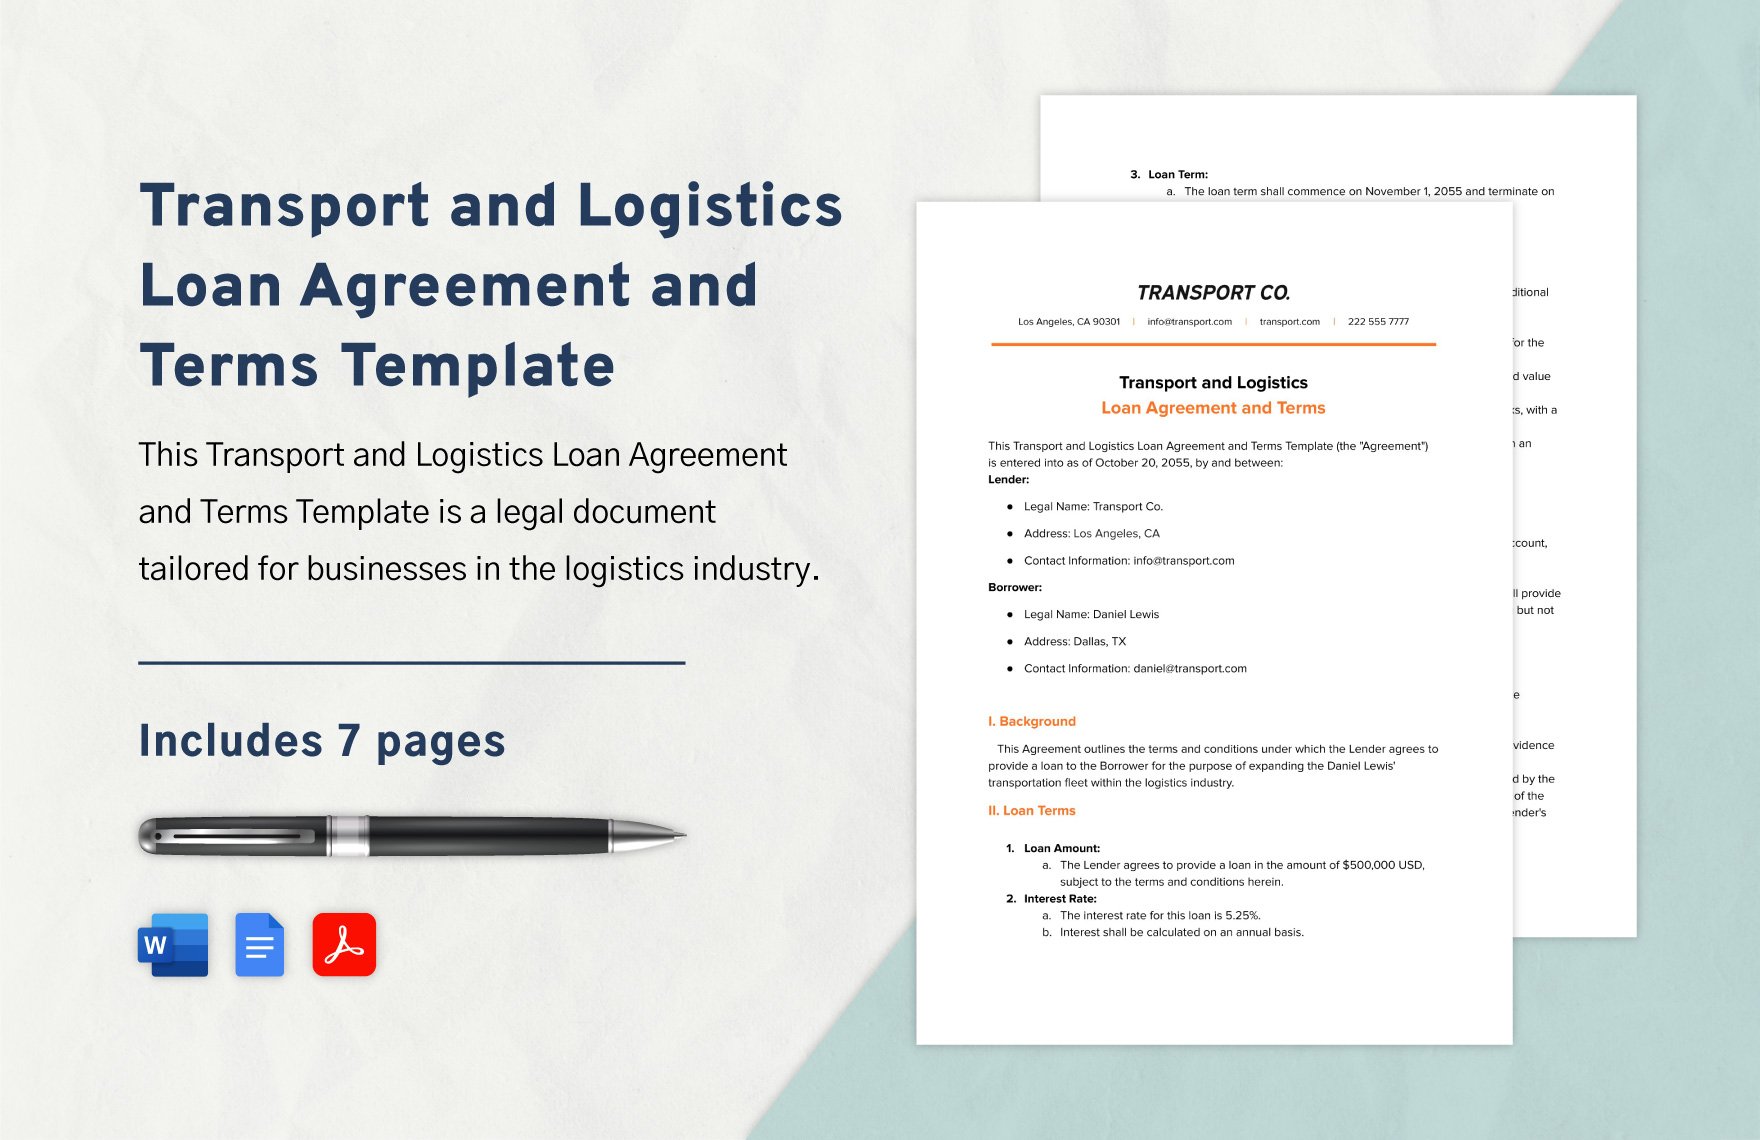 Transport and Logistics Loan Agreement and Terms Template